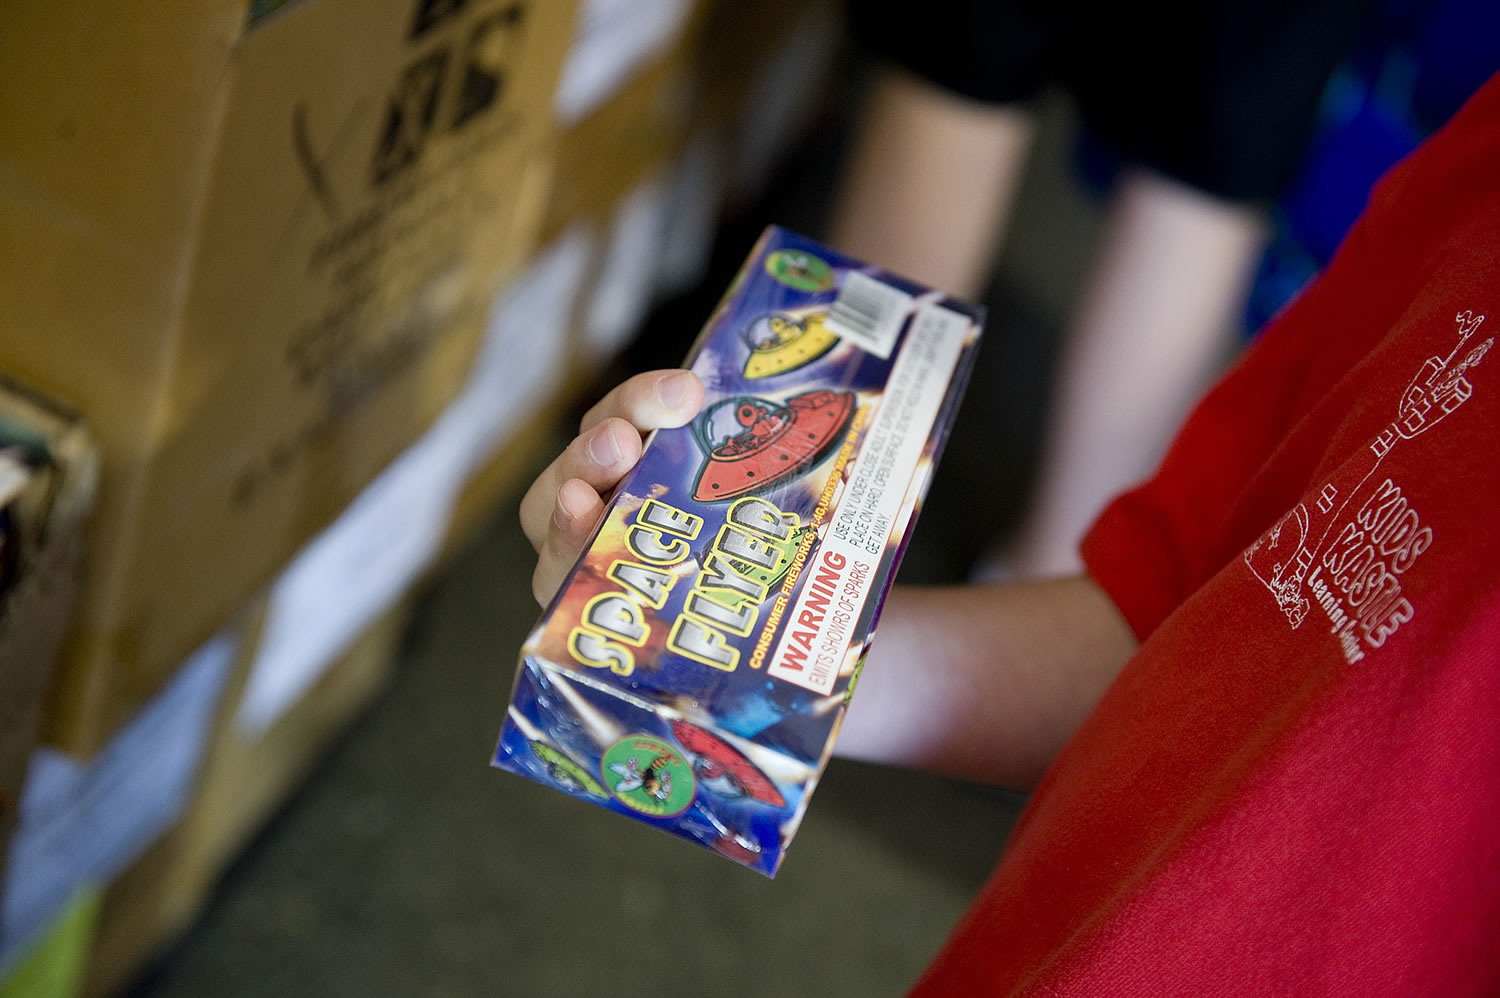 The city of Vancouver is considering a ban on fireworks. Now, Camas is poised to vote on further restricting fireworks sales days and discharge times.